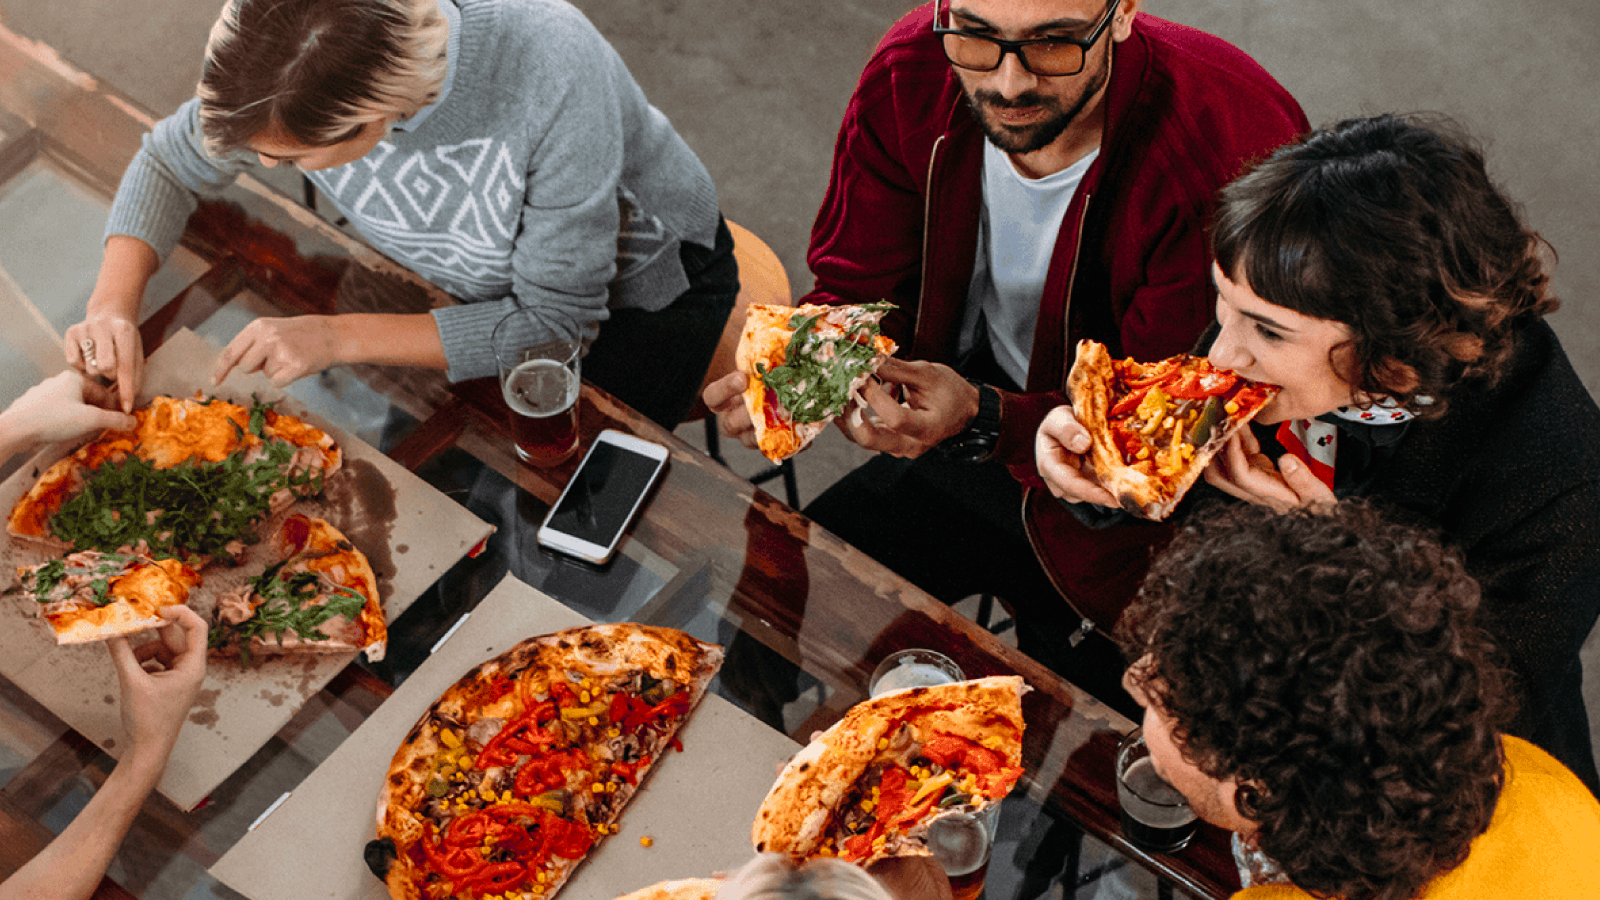 Five people eating pizza at a table in a pizzeria